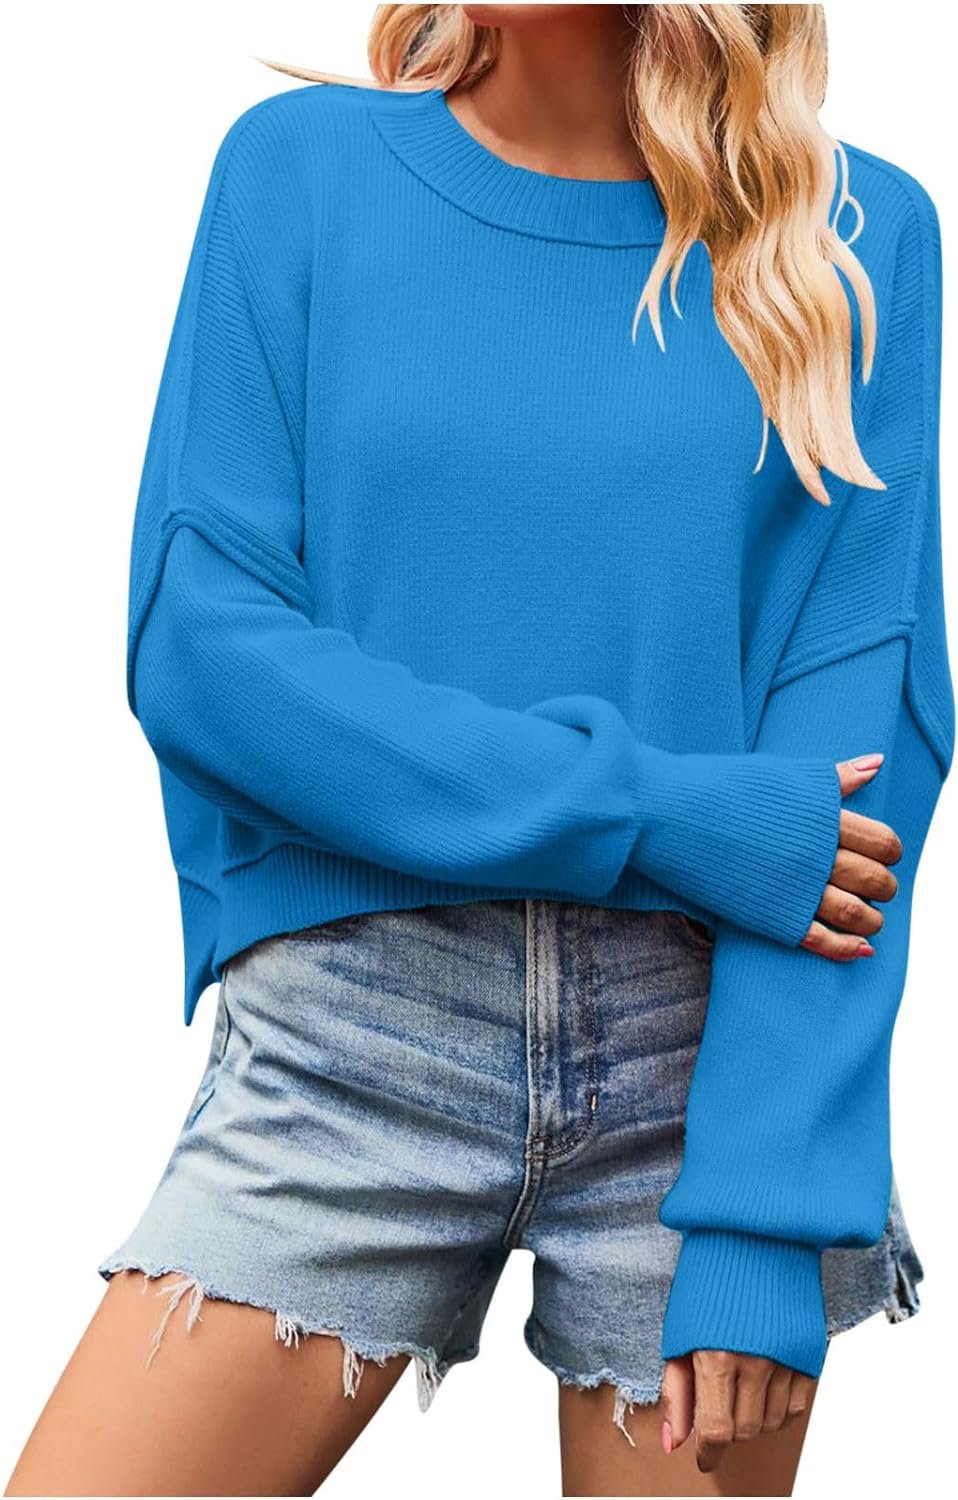 Womens Batwing Long Sleeve Sweater Oversized Pullover Tops Crew Neck Knit Sweaters Soft Ribbed Knitted Jumper